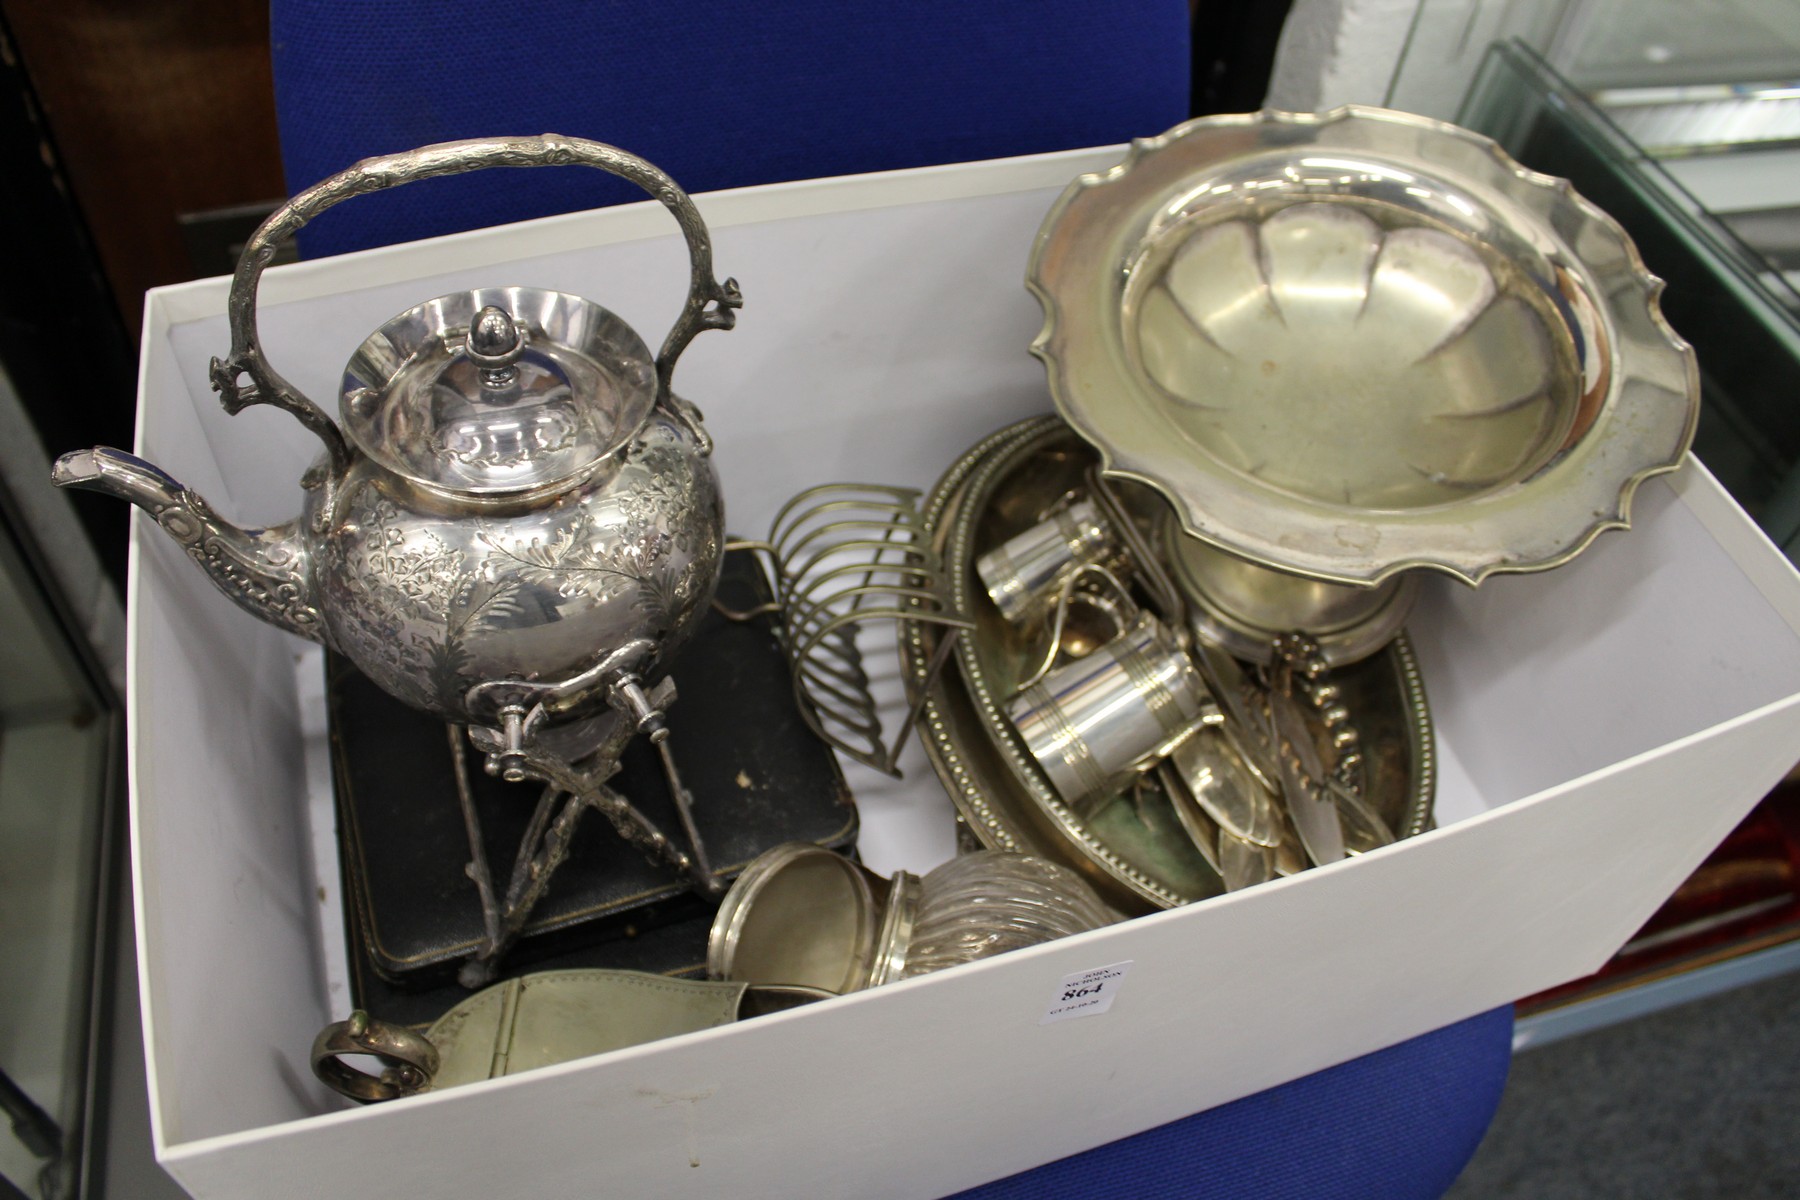 A plated kettle on stand and other items.